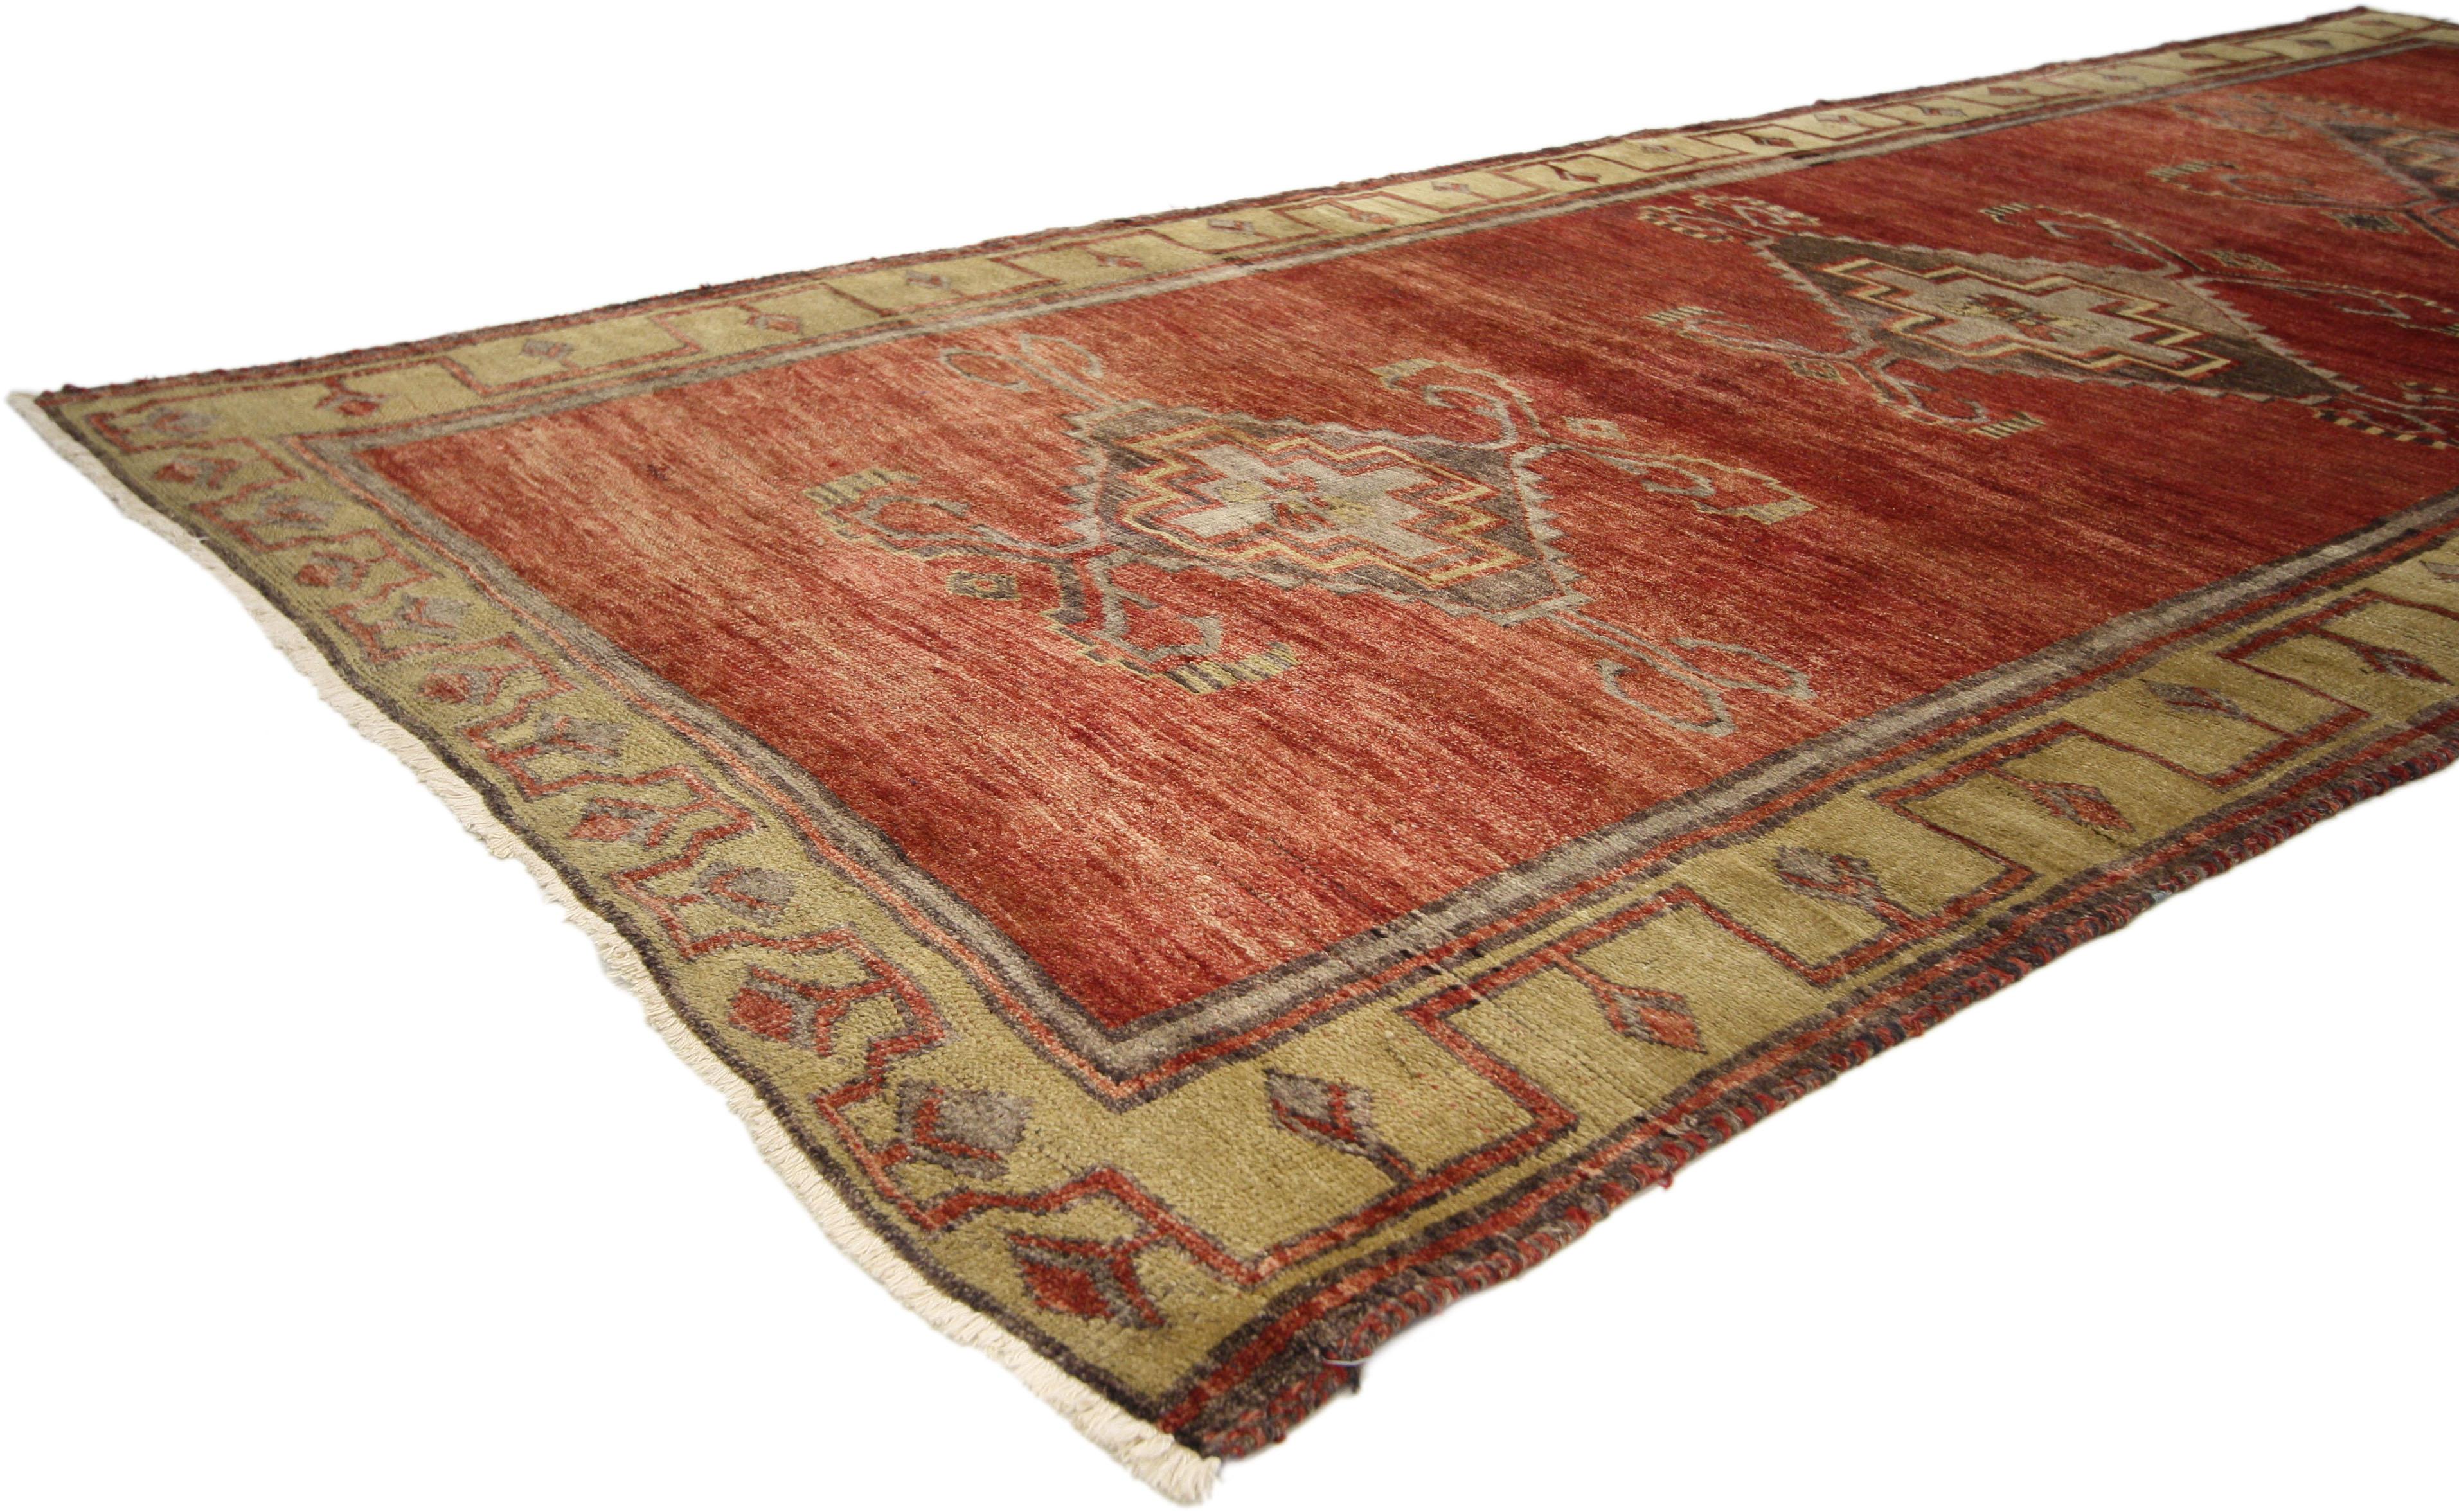 51134 Vintage Red Turkish Oushak Rug, 05'00 x 11'11. ​Turkish Oushak gallery rugs are large, intricately woven carpets known for their fine craftsmanship, elaborate designs, and rich colors. Originating from the Oushak region of Turkey, these rugs